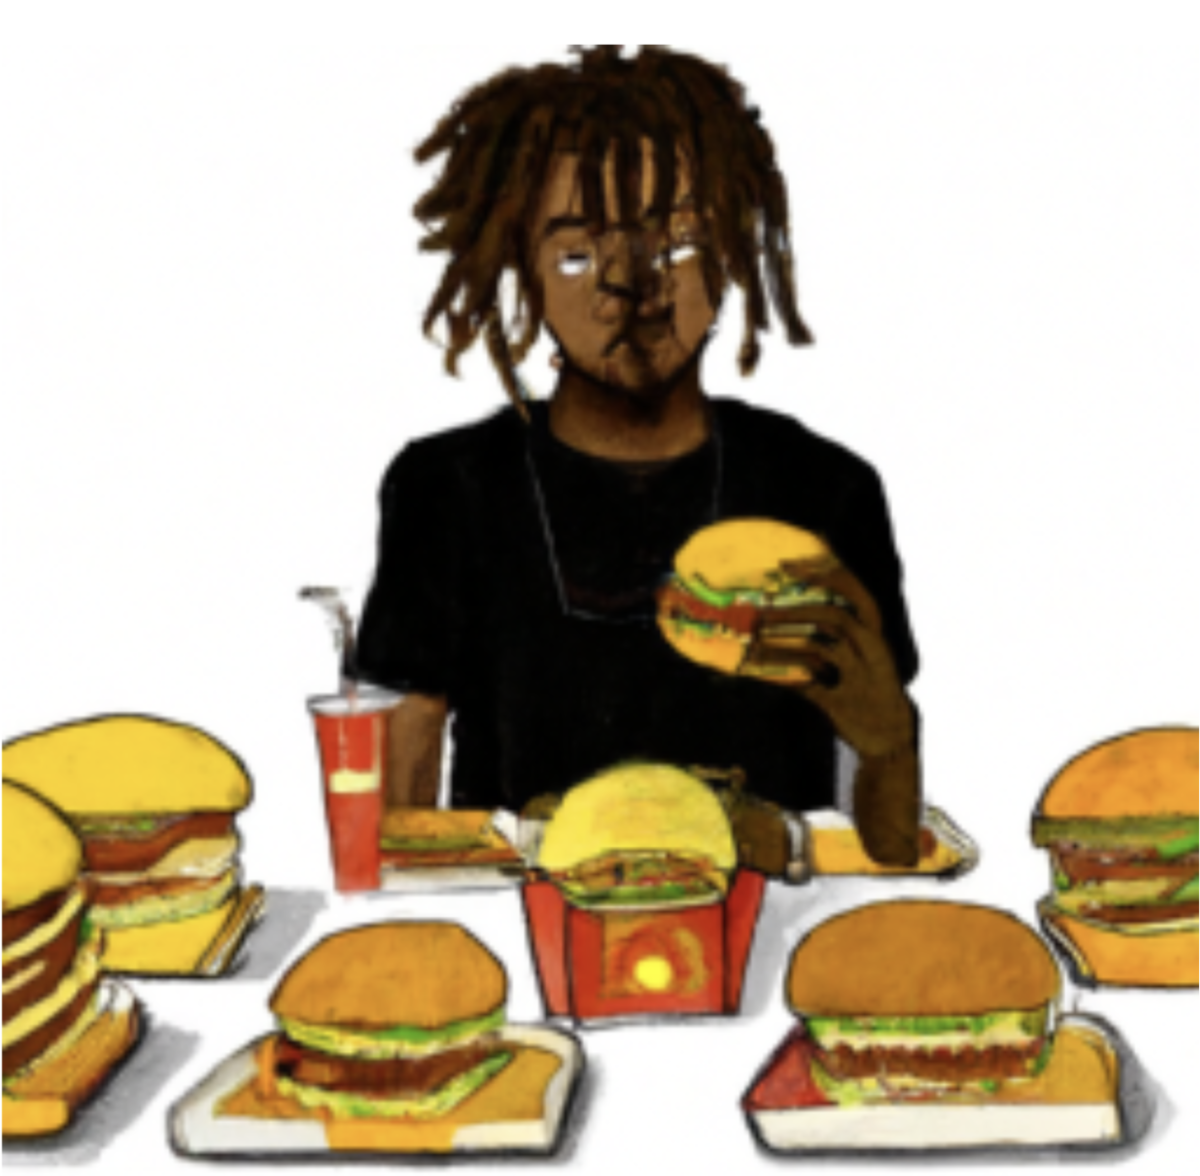 Note.+AI+generated+image+using+Photoshop+from+the+prompt+black+boy+with+dreads+eats+McDonalds